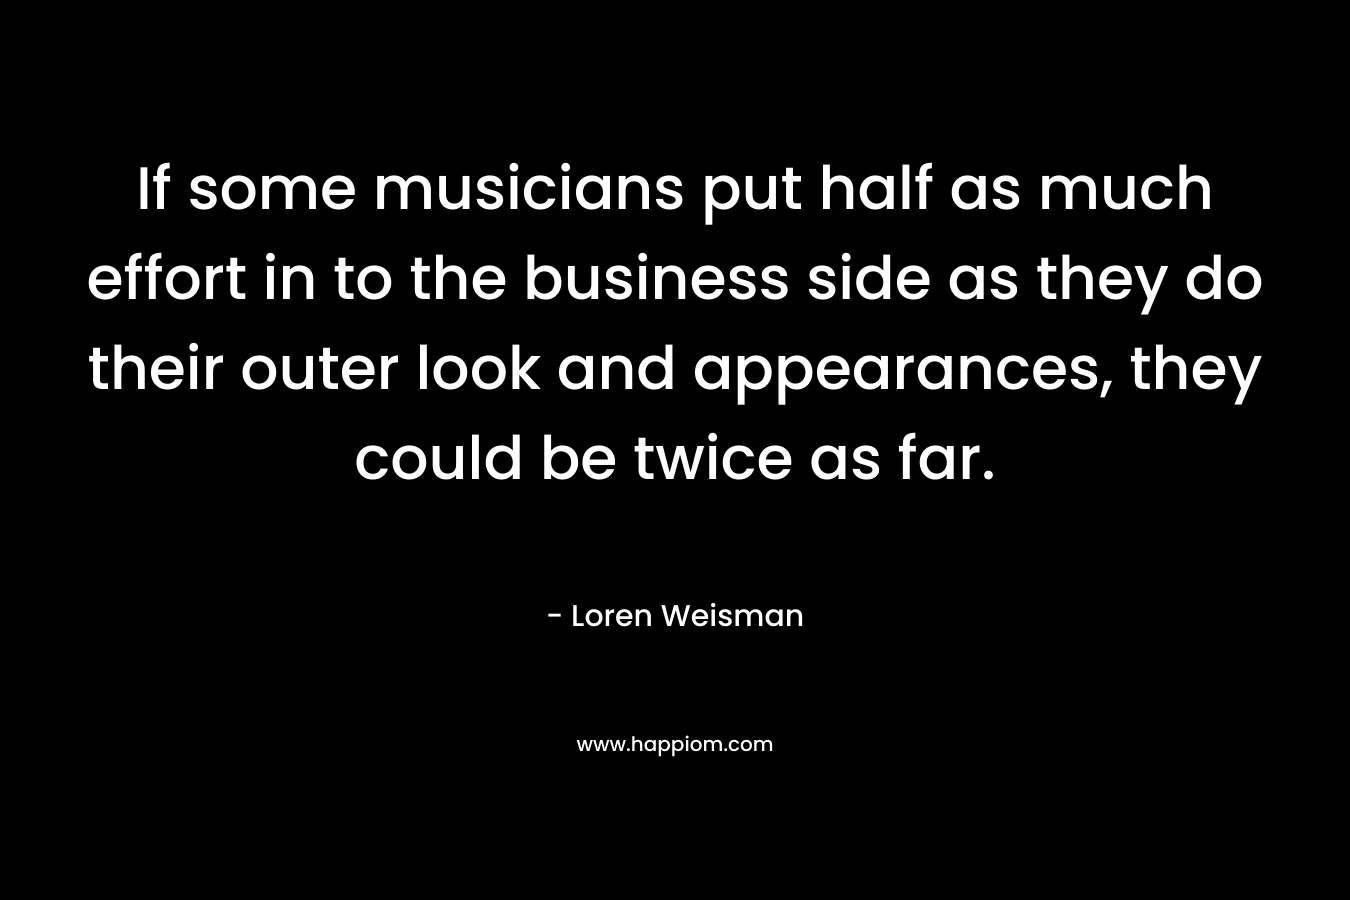 If some musicians put half as much effort in to the business side as they do their outer look and appearances, they could be twice as far. – Loren Weisman